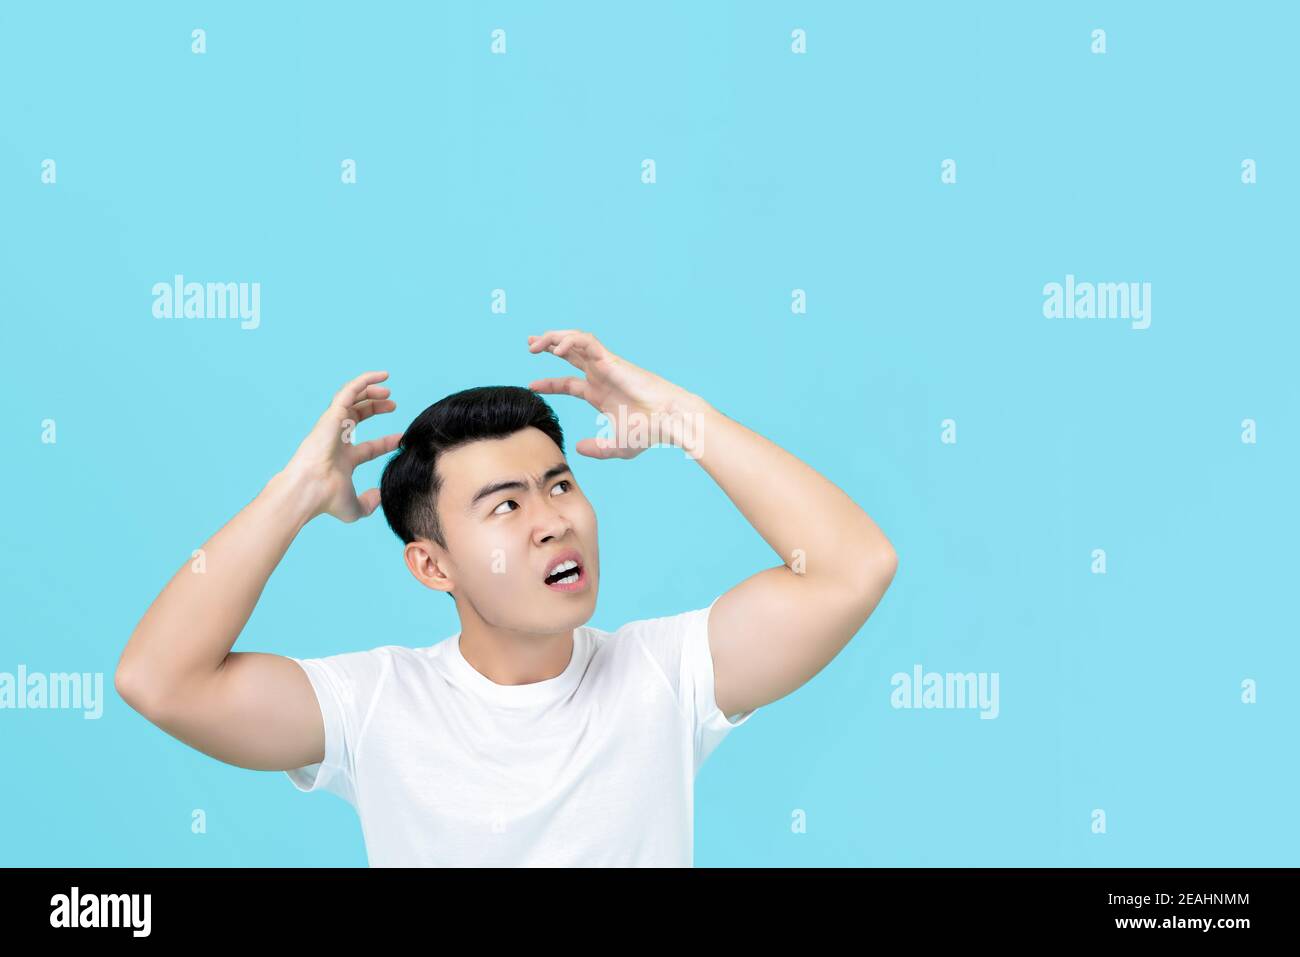 Upset angry Asian man with hands over head isolated on light blue background Stock Photo